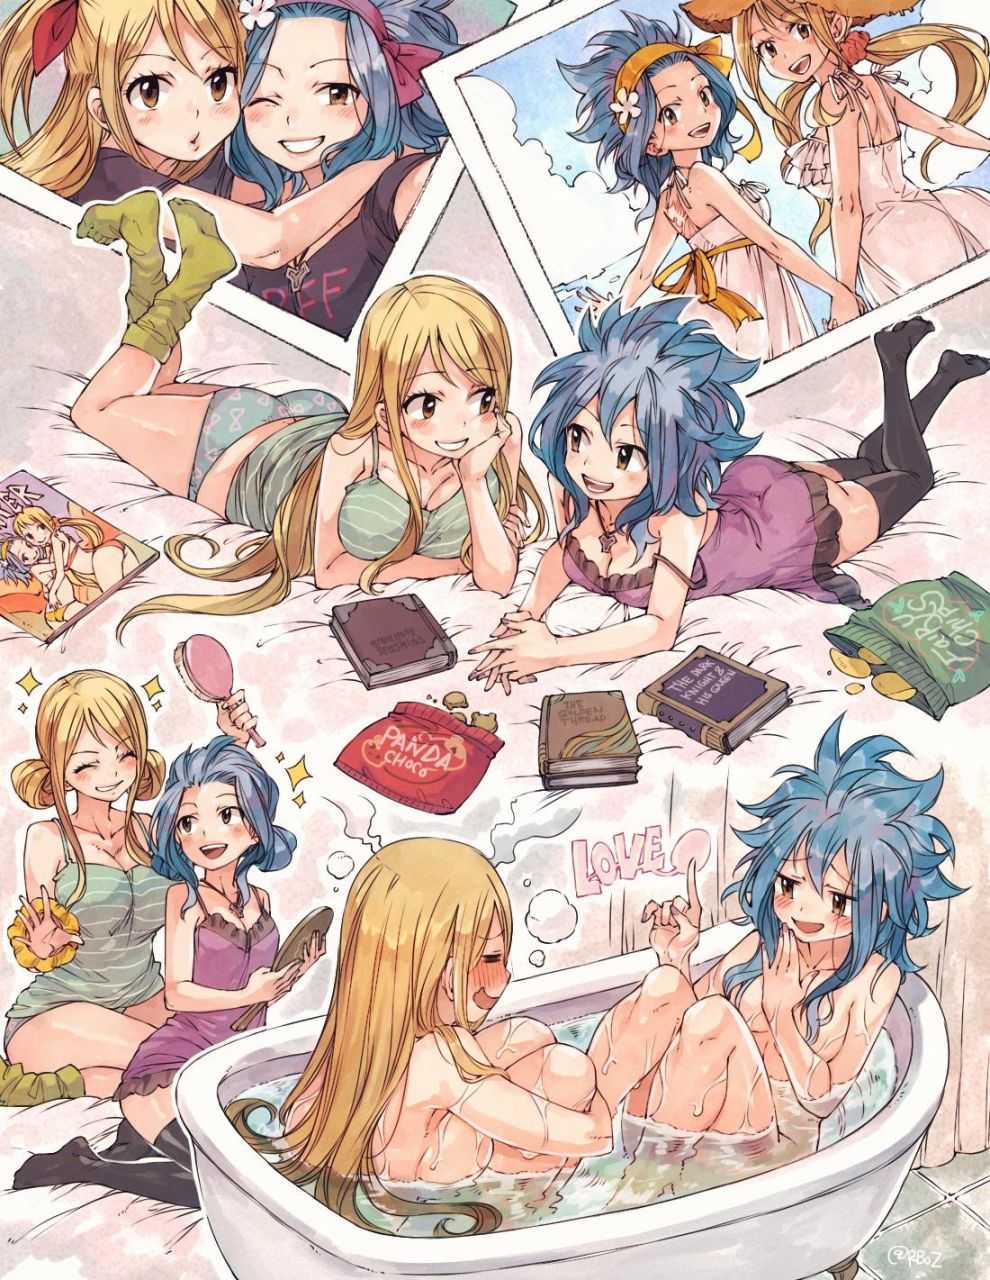 lucy-and-levy-being-adorable-rboz-fairy-tail.jpg